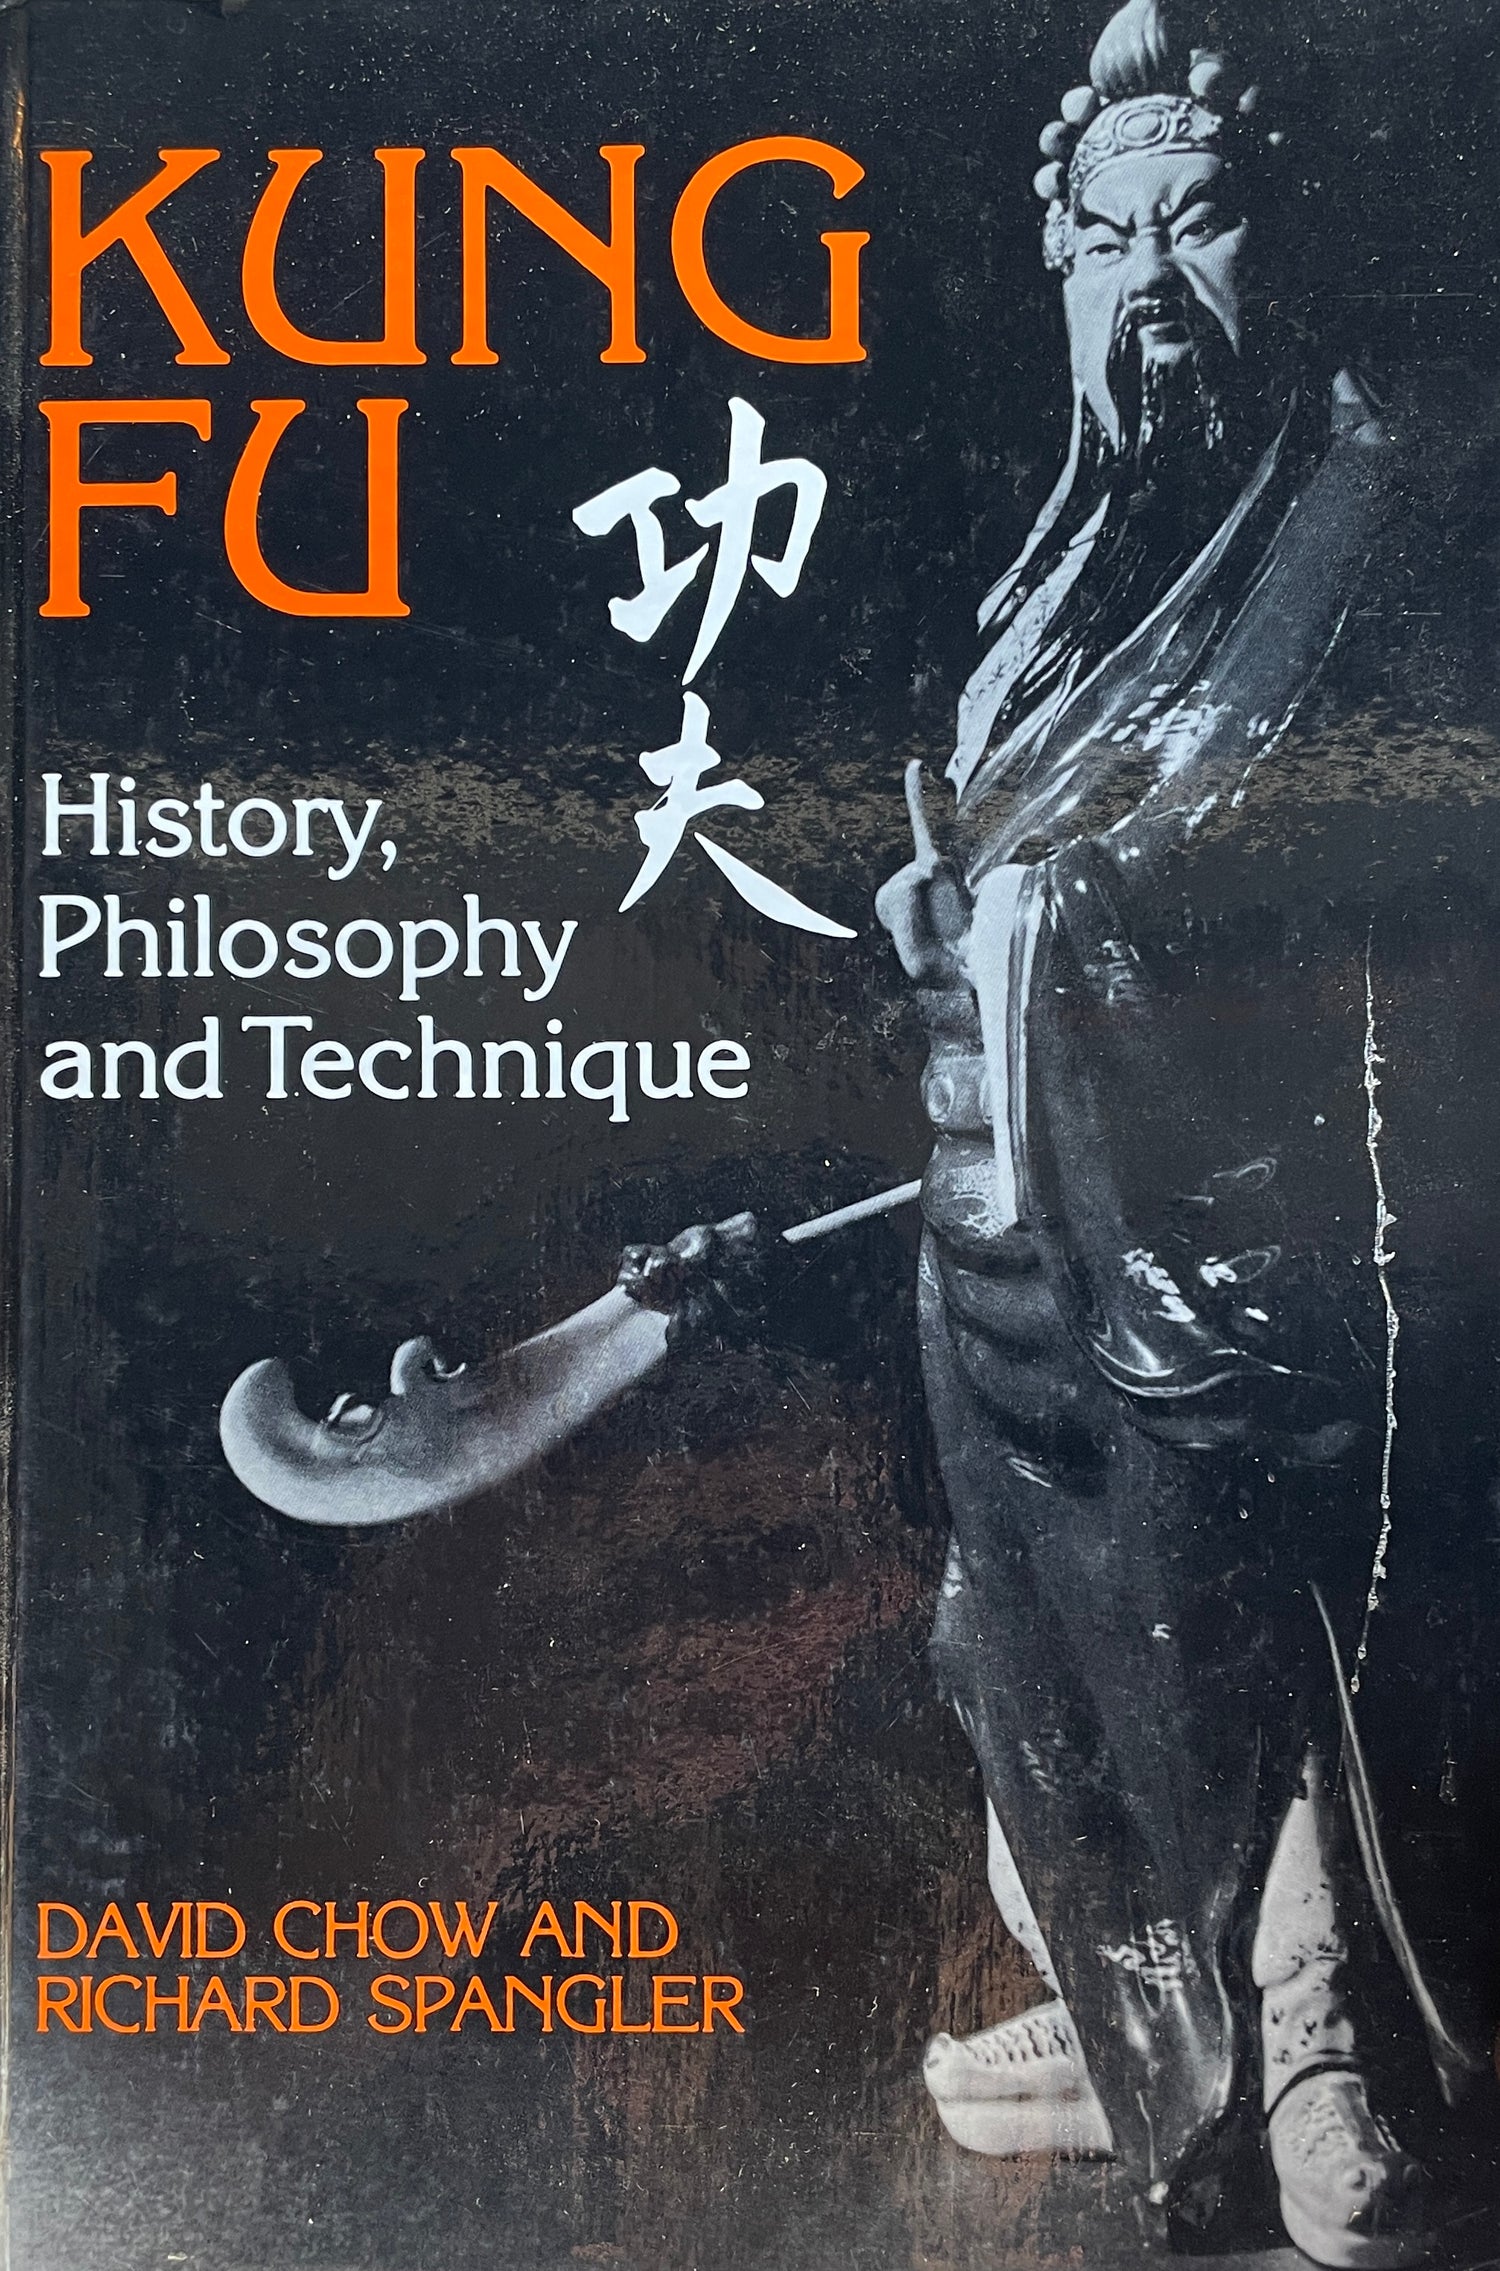 Kung Fu: History, Philosophy and Technique Book by David Chow (Hardcover) (Preowned)